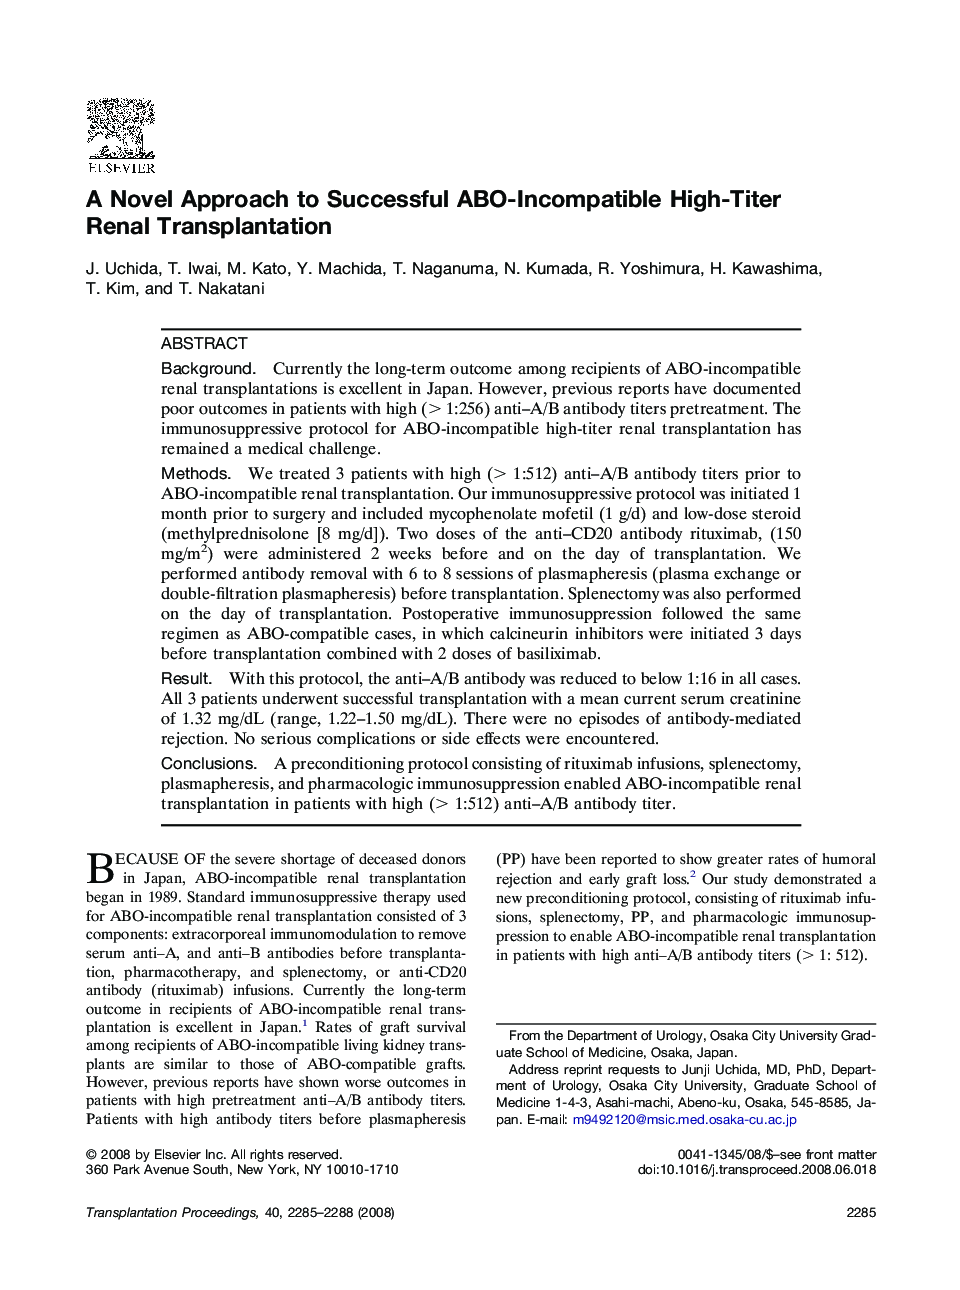 A Novel Approach to Successful ABO-Incompatible High-Titer Renal Transplantation